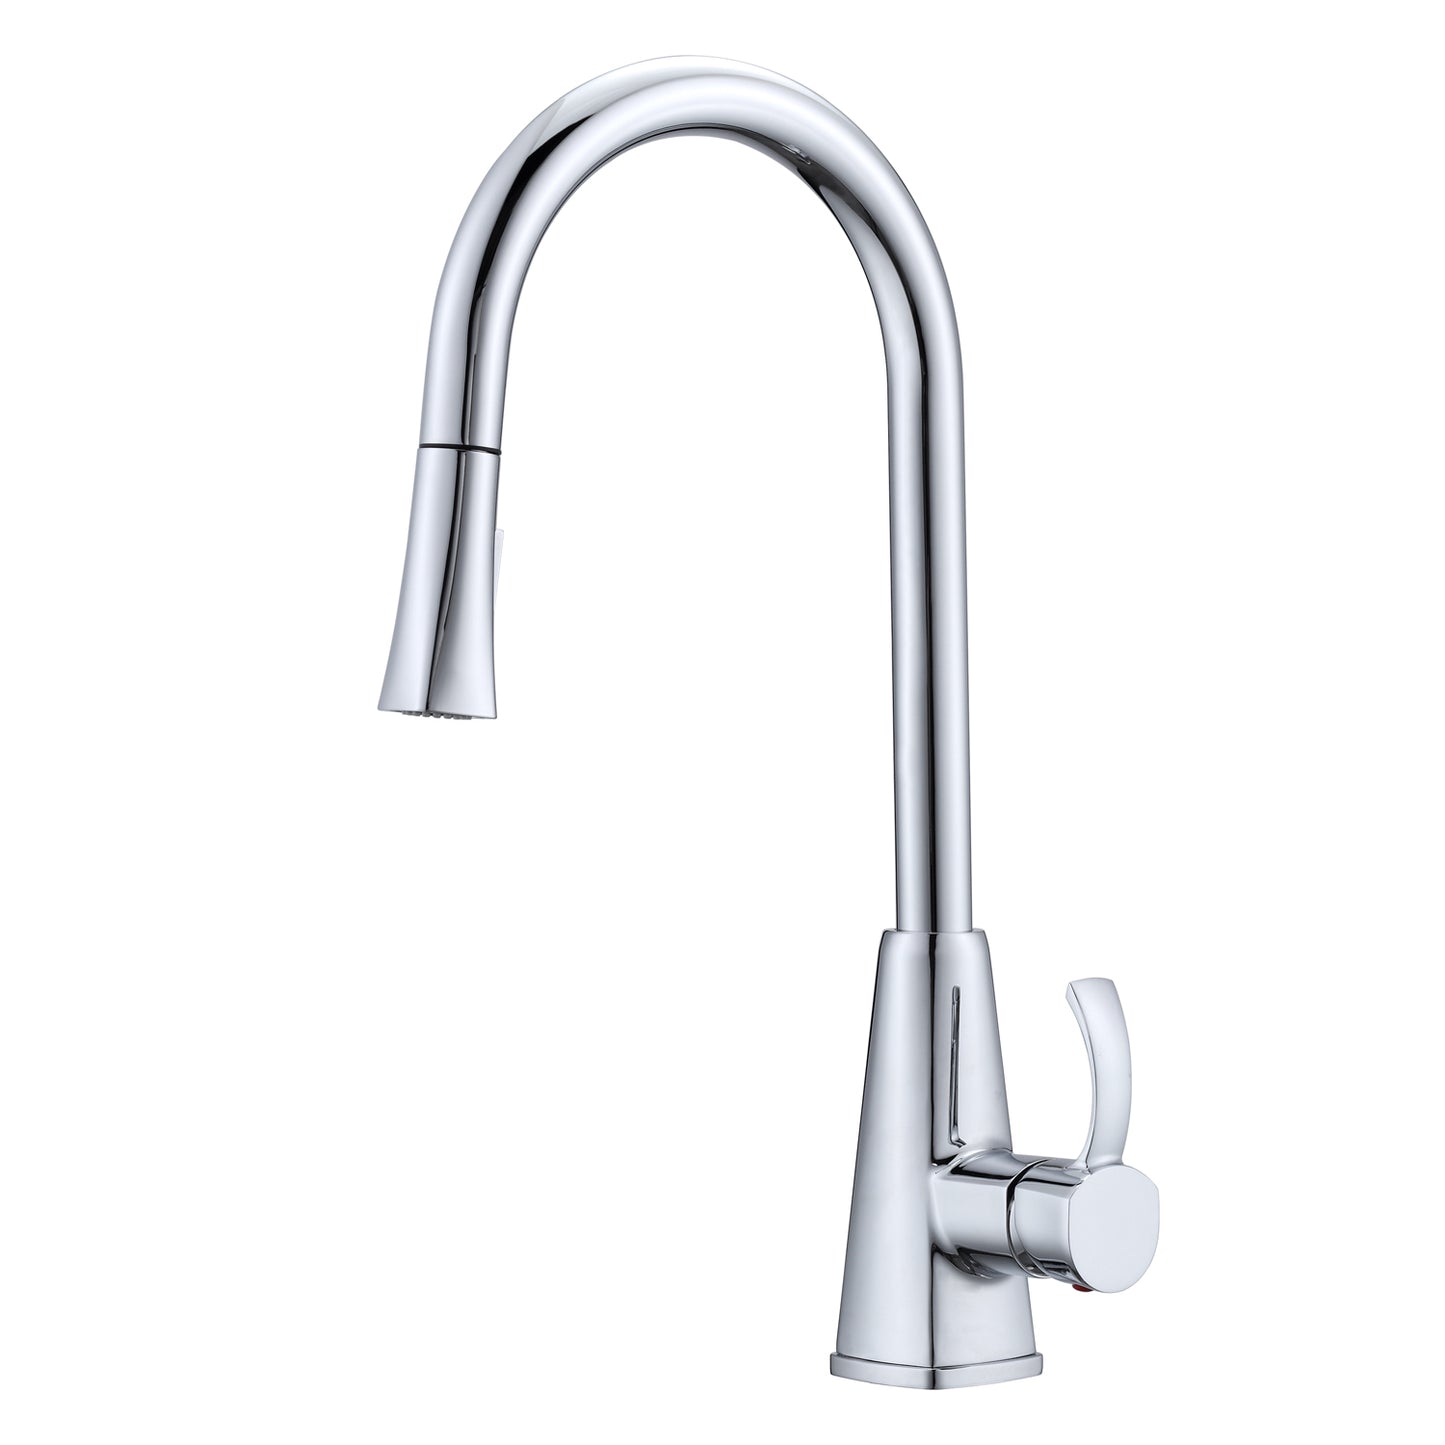 Christabel Pull-down Kitchen Faucet with Hose, Polished Chrome